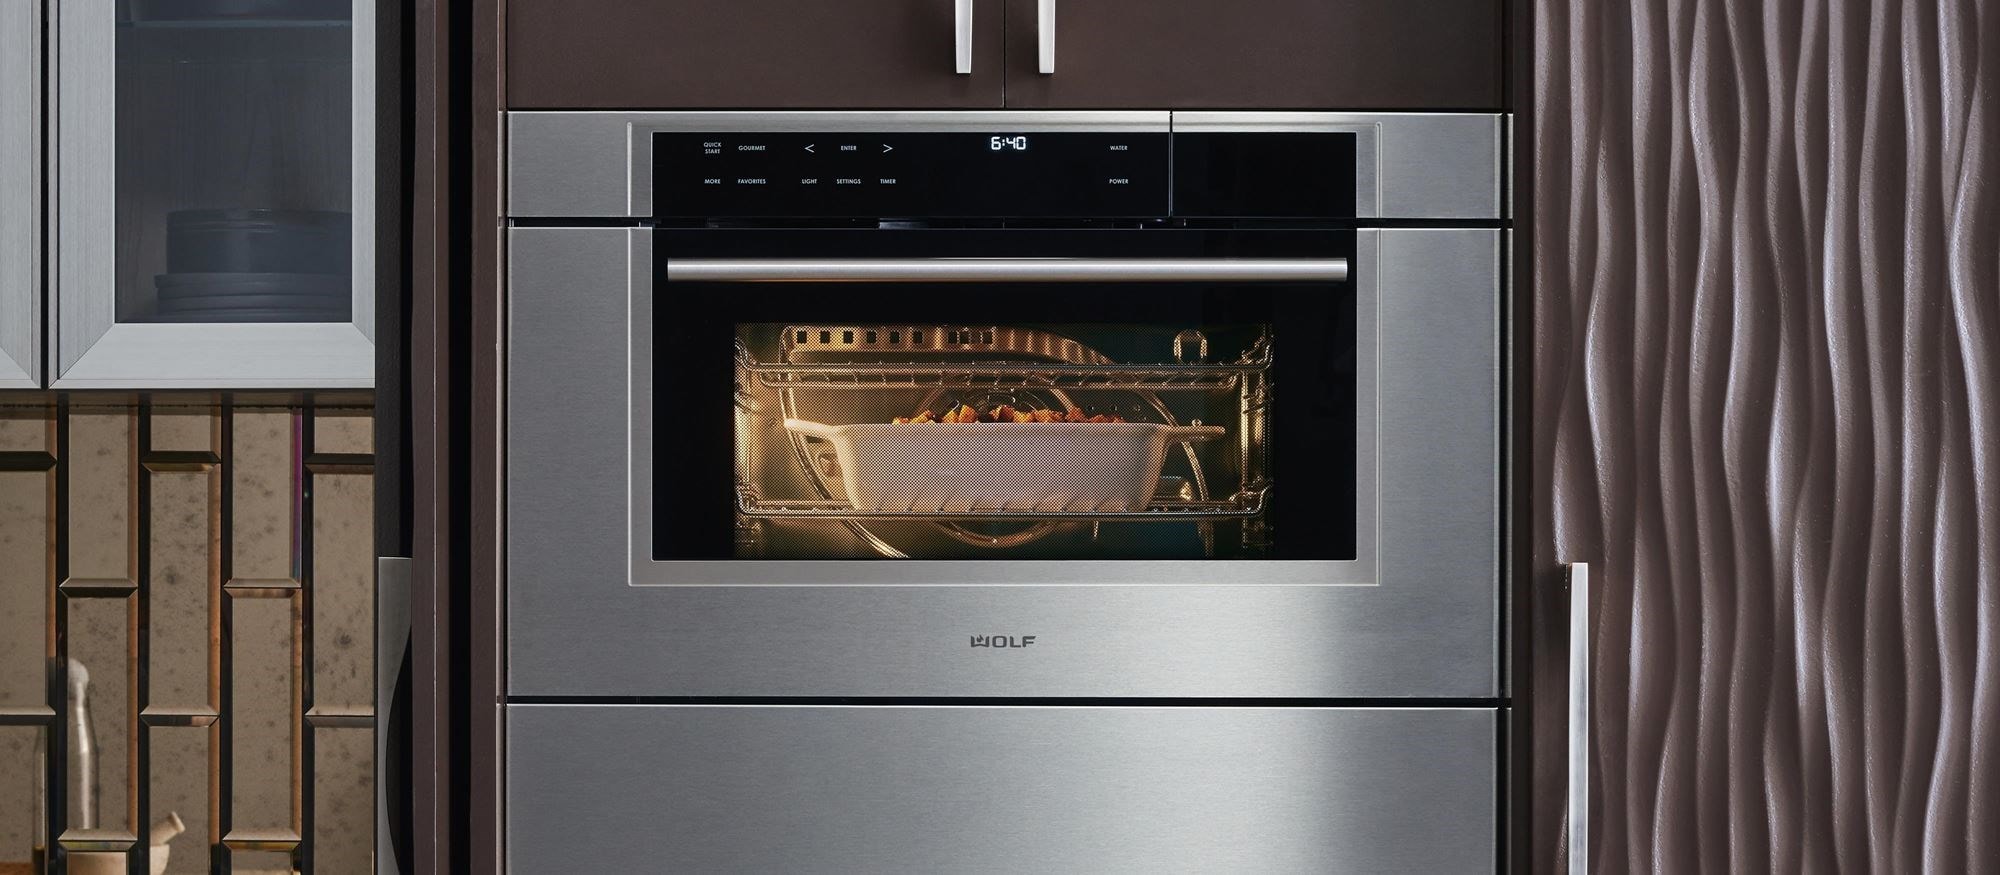 Steam Convection Ovens